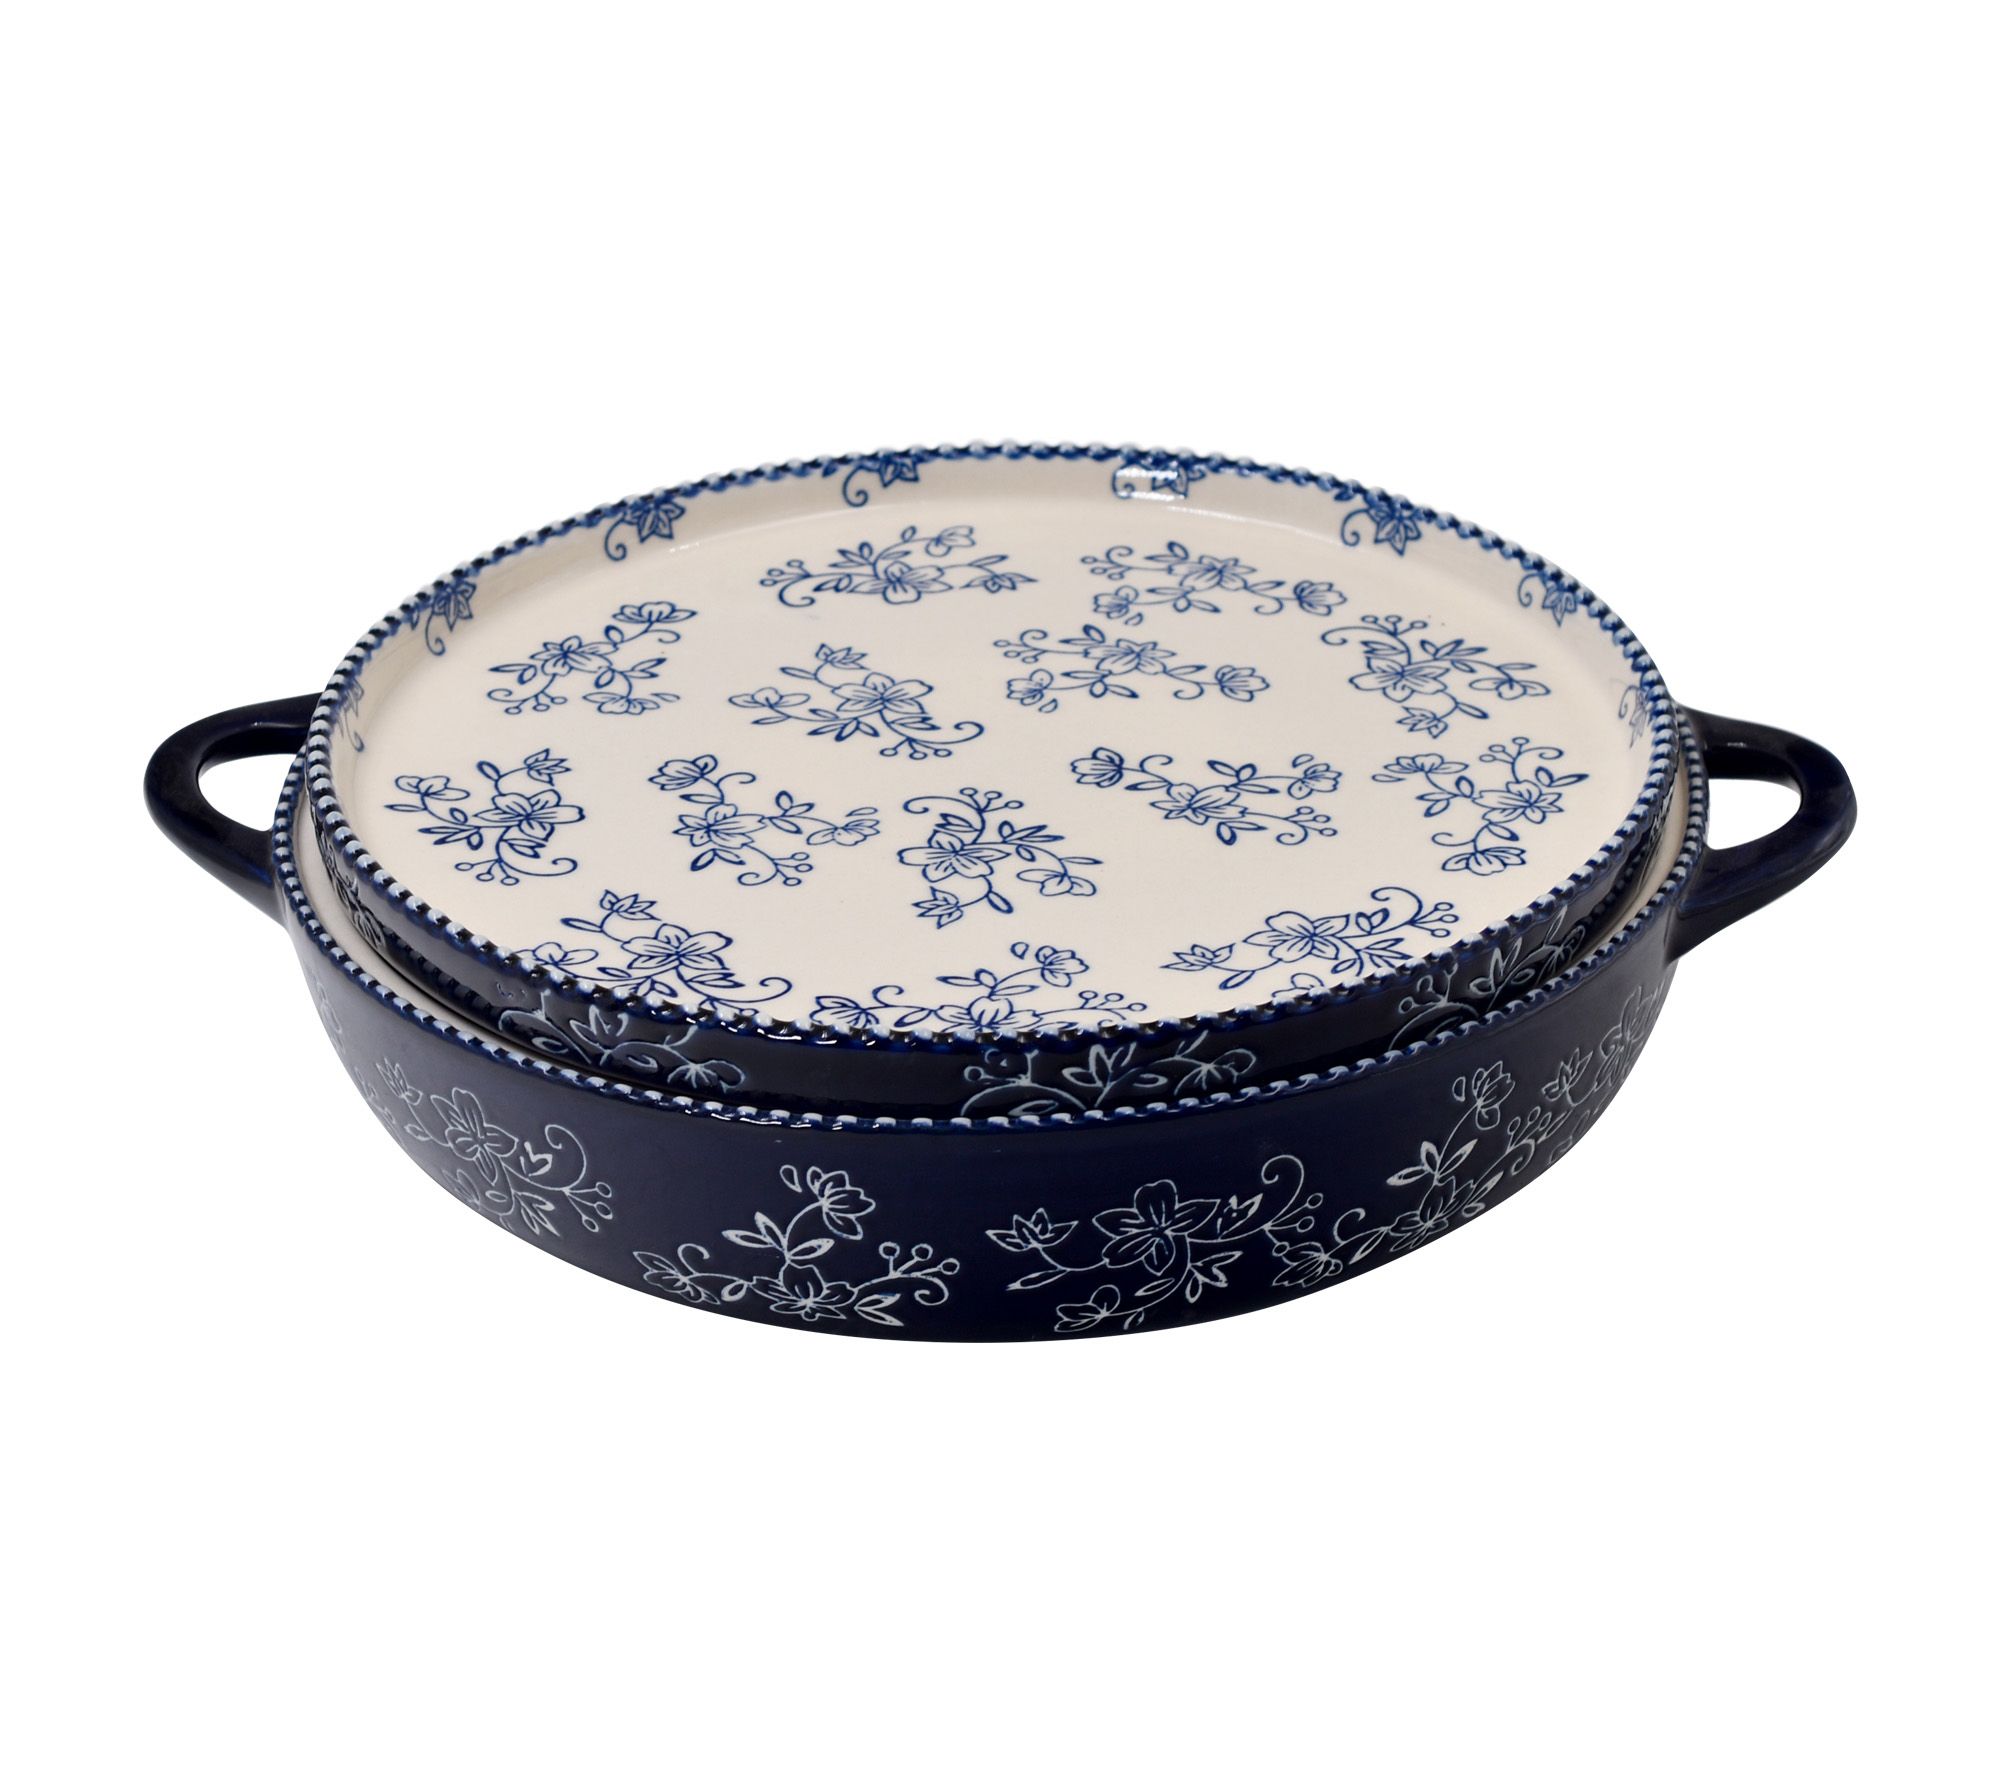 Temp-tations 6-qt Old World Floral Lace Patterned Slow Cooker